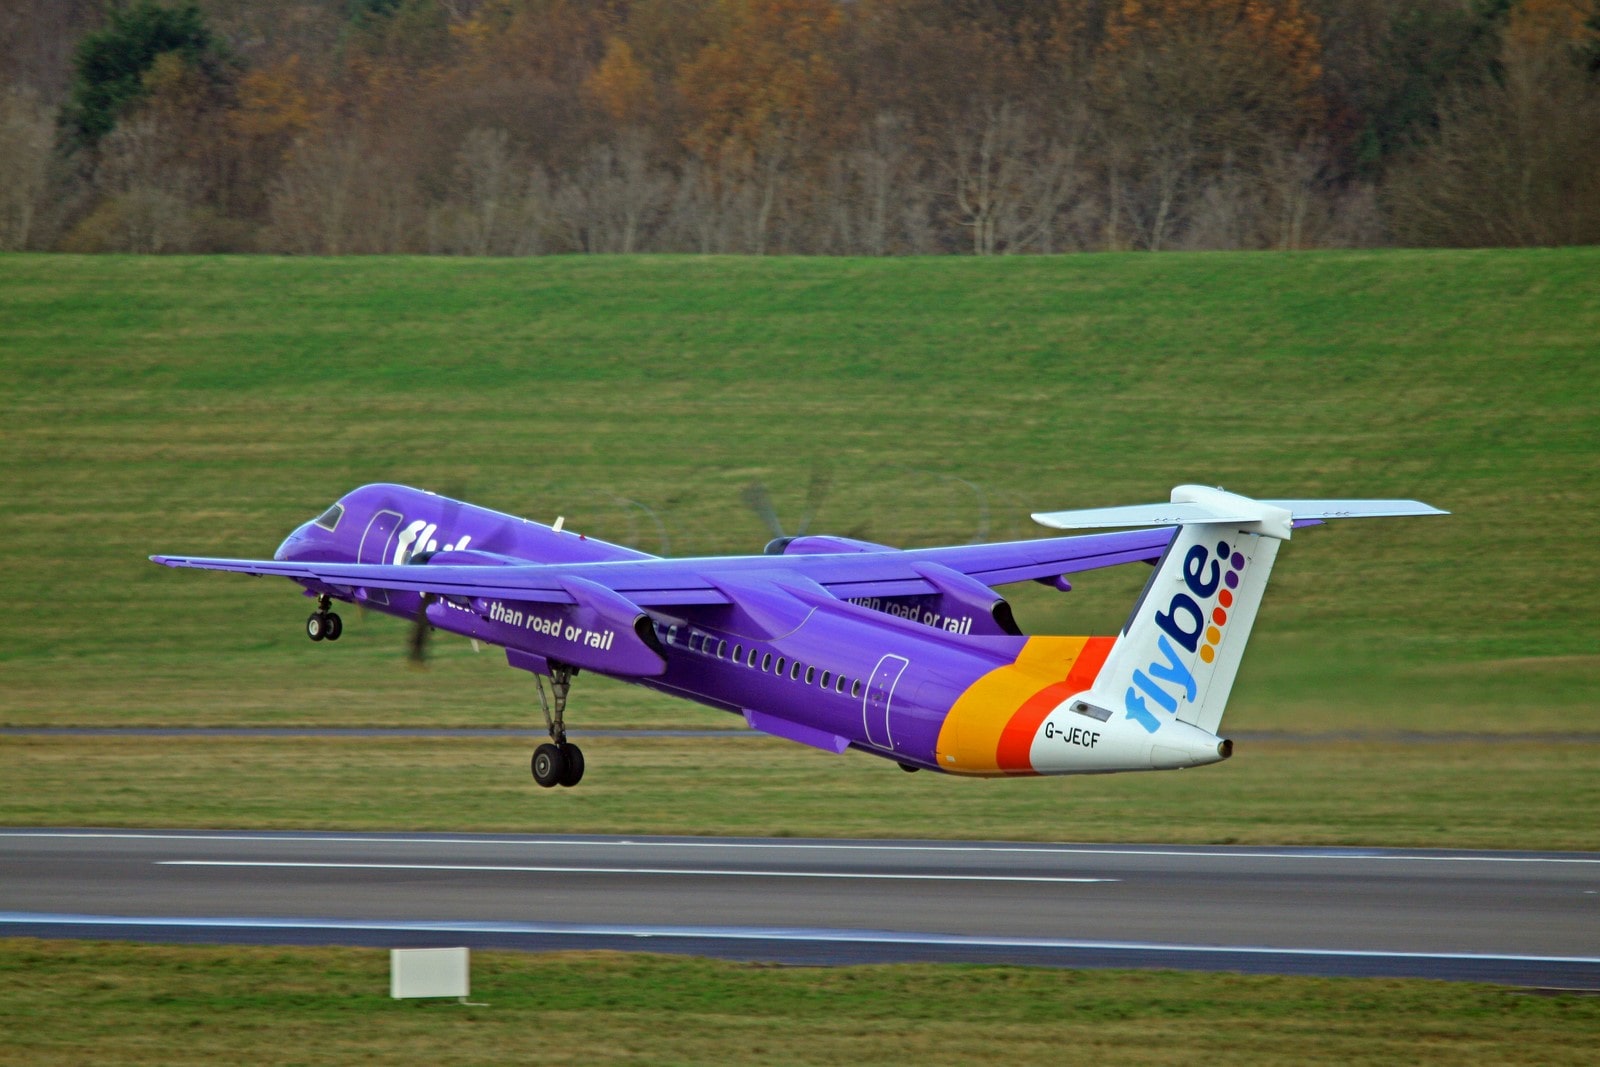 Flybe.com Airlines